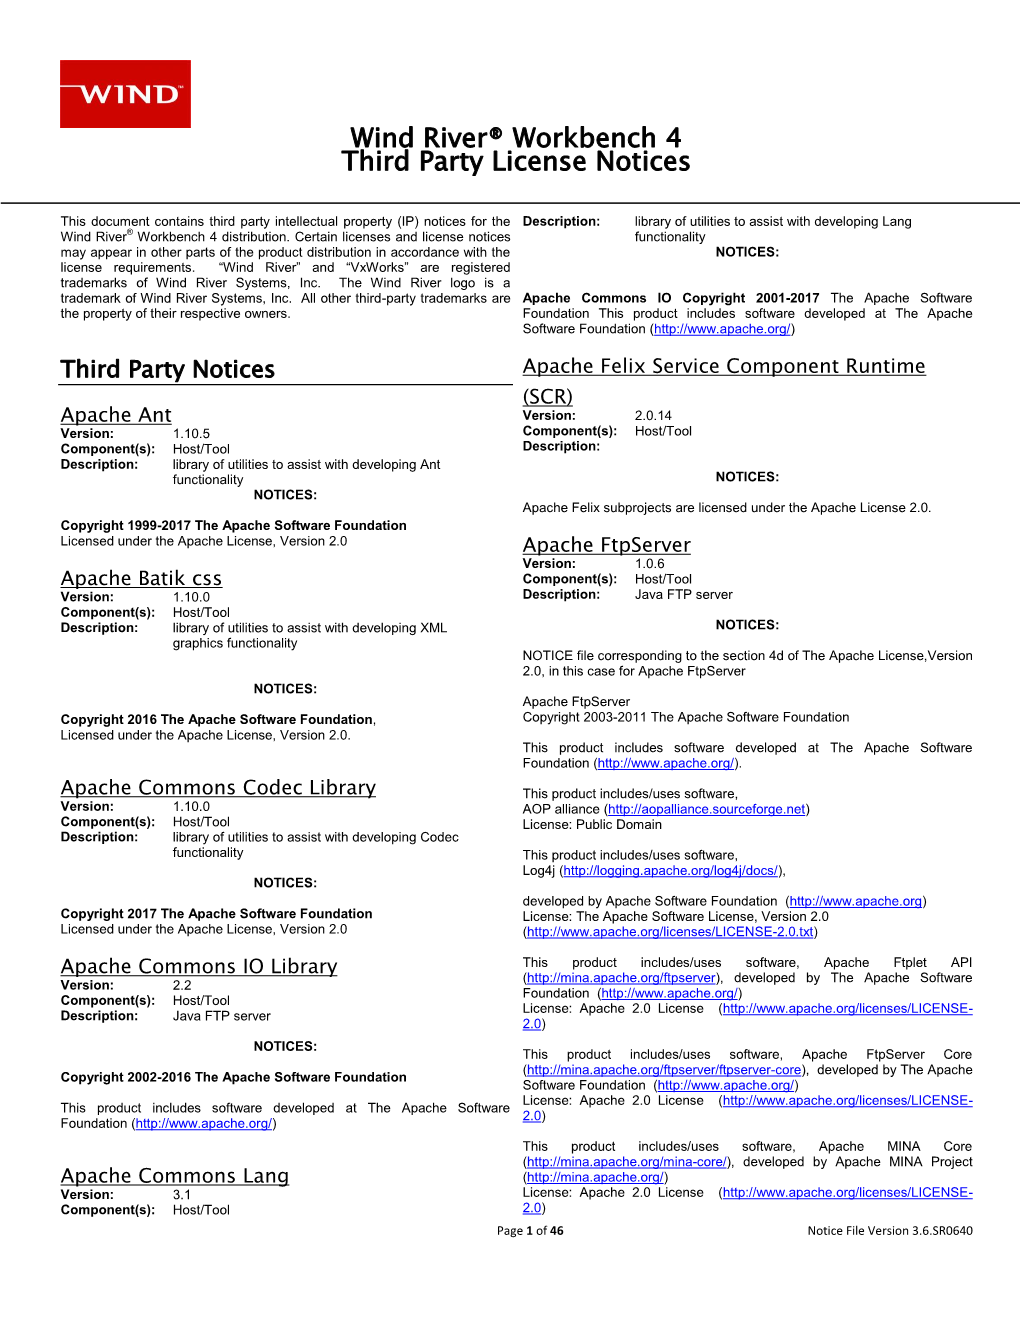 Workbench 4Third Party Software Notices